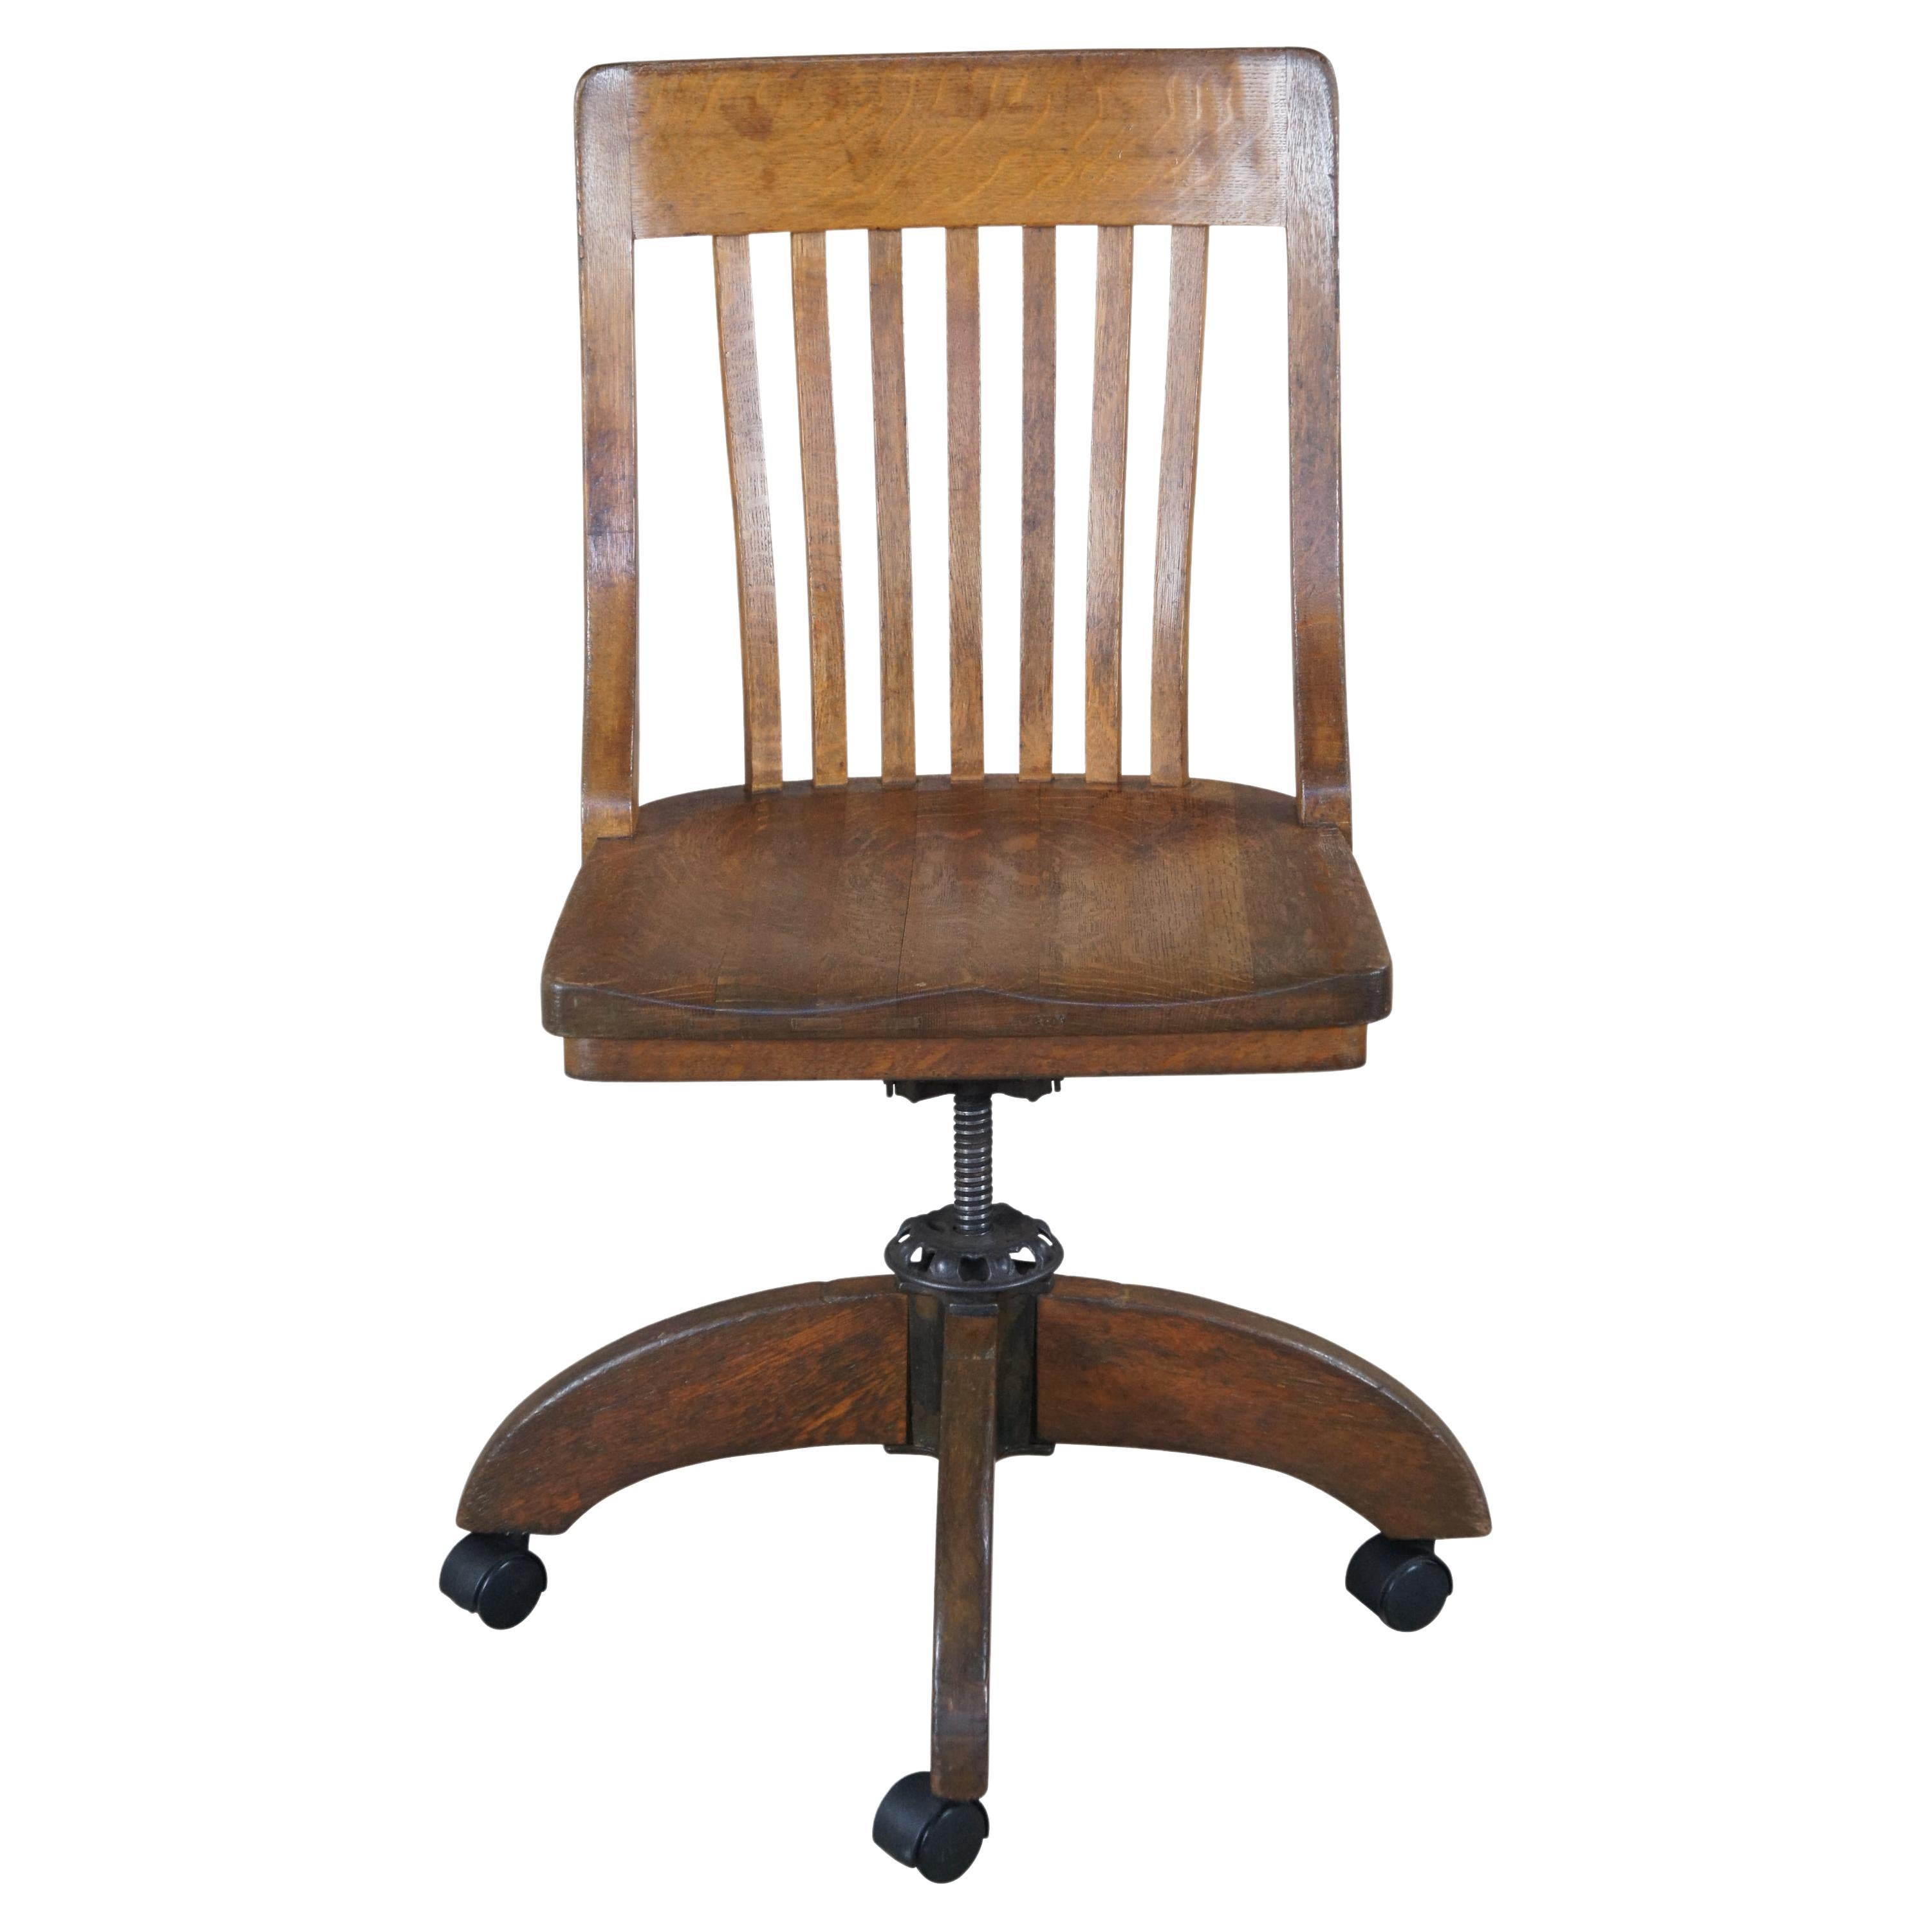 Antique W.H. Gunlocke quartersawn oak bankers / lawyers / executive desk chair featuring a slatted back and adjustable swivel recline.

William Henry Gunlocke entered the chair business in Binghamton in 1888 as a wood finisher and rose to the